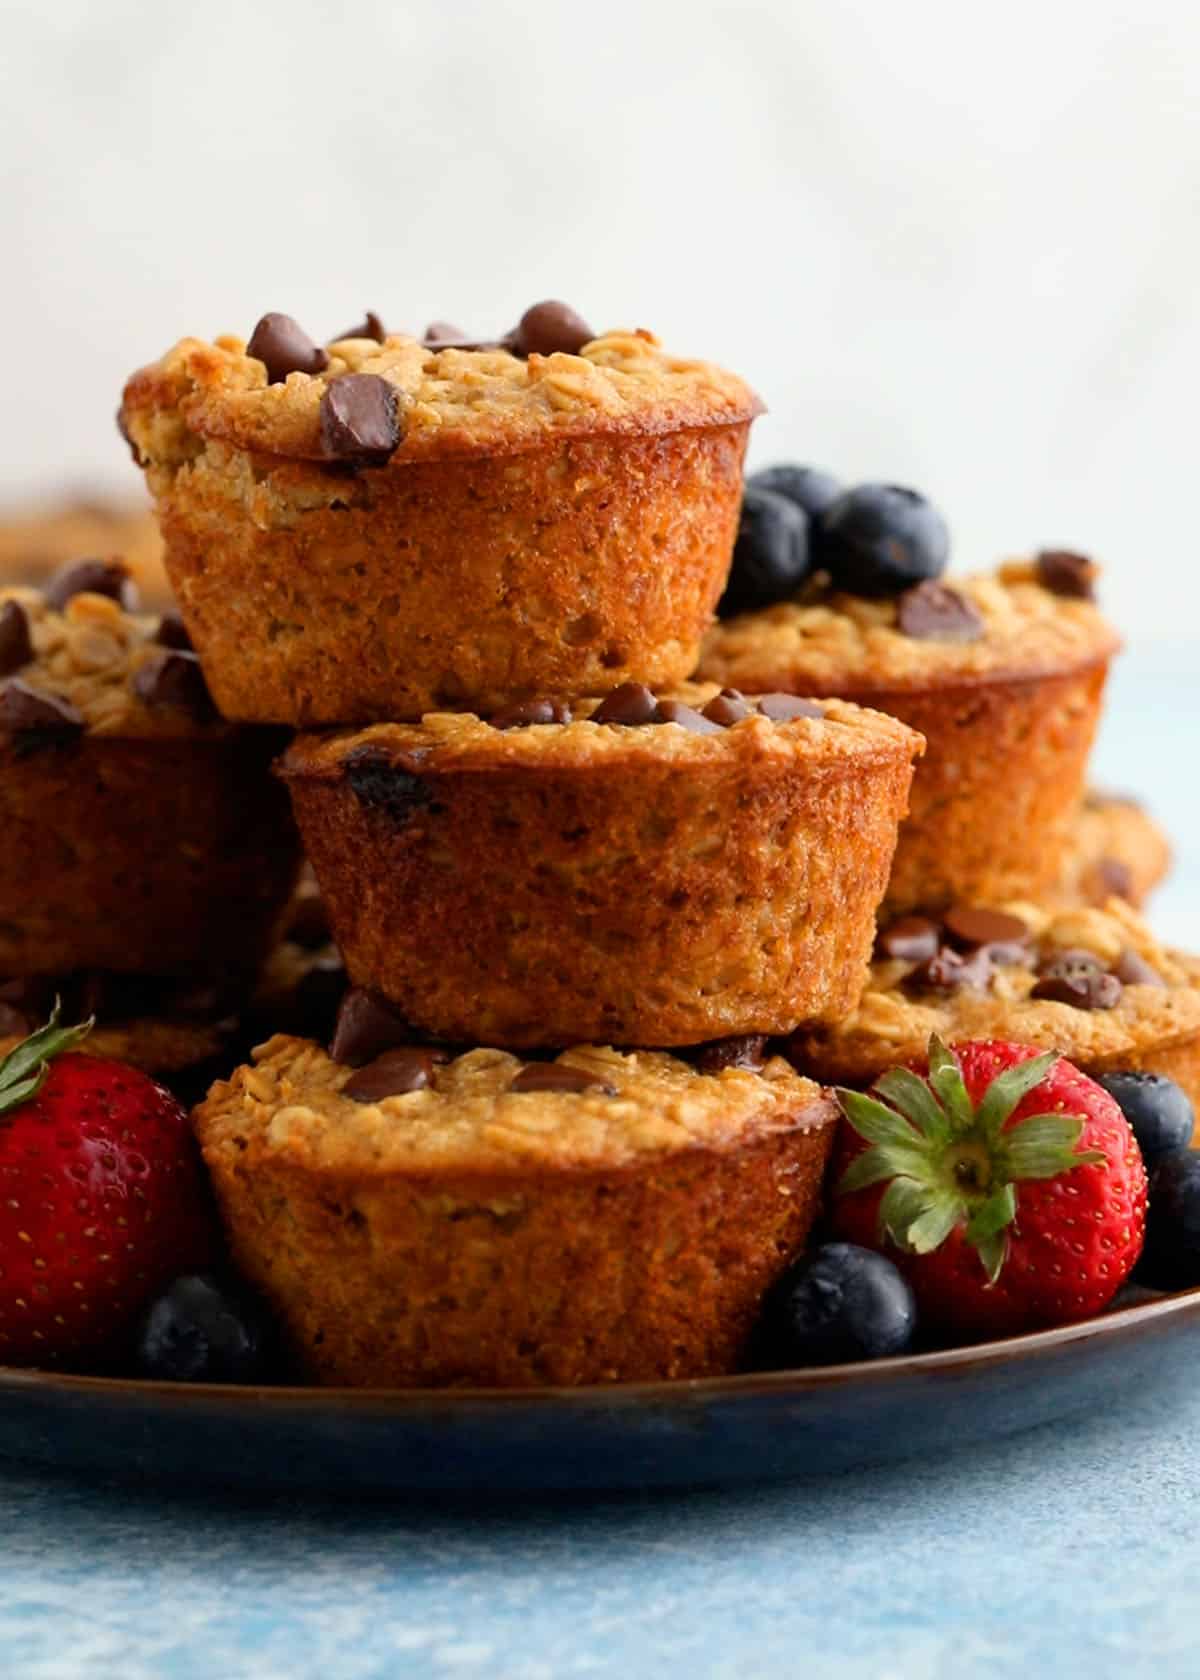 5 oatmeal cup muffins piled high on a plate.